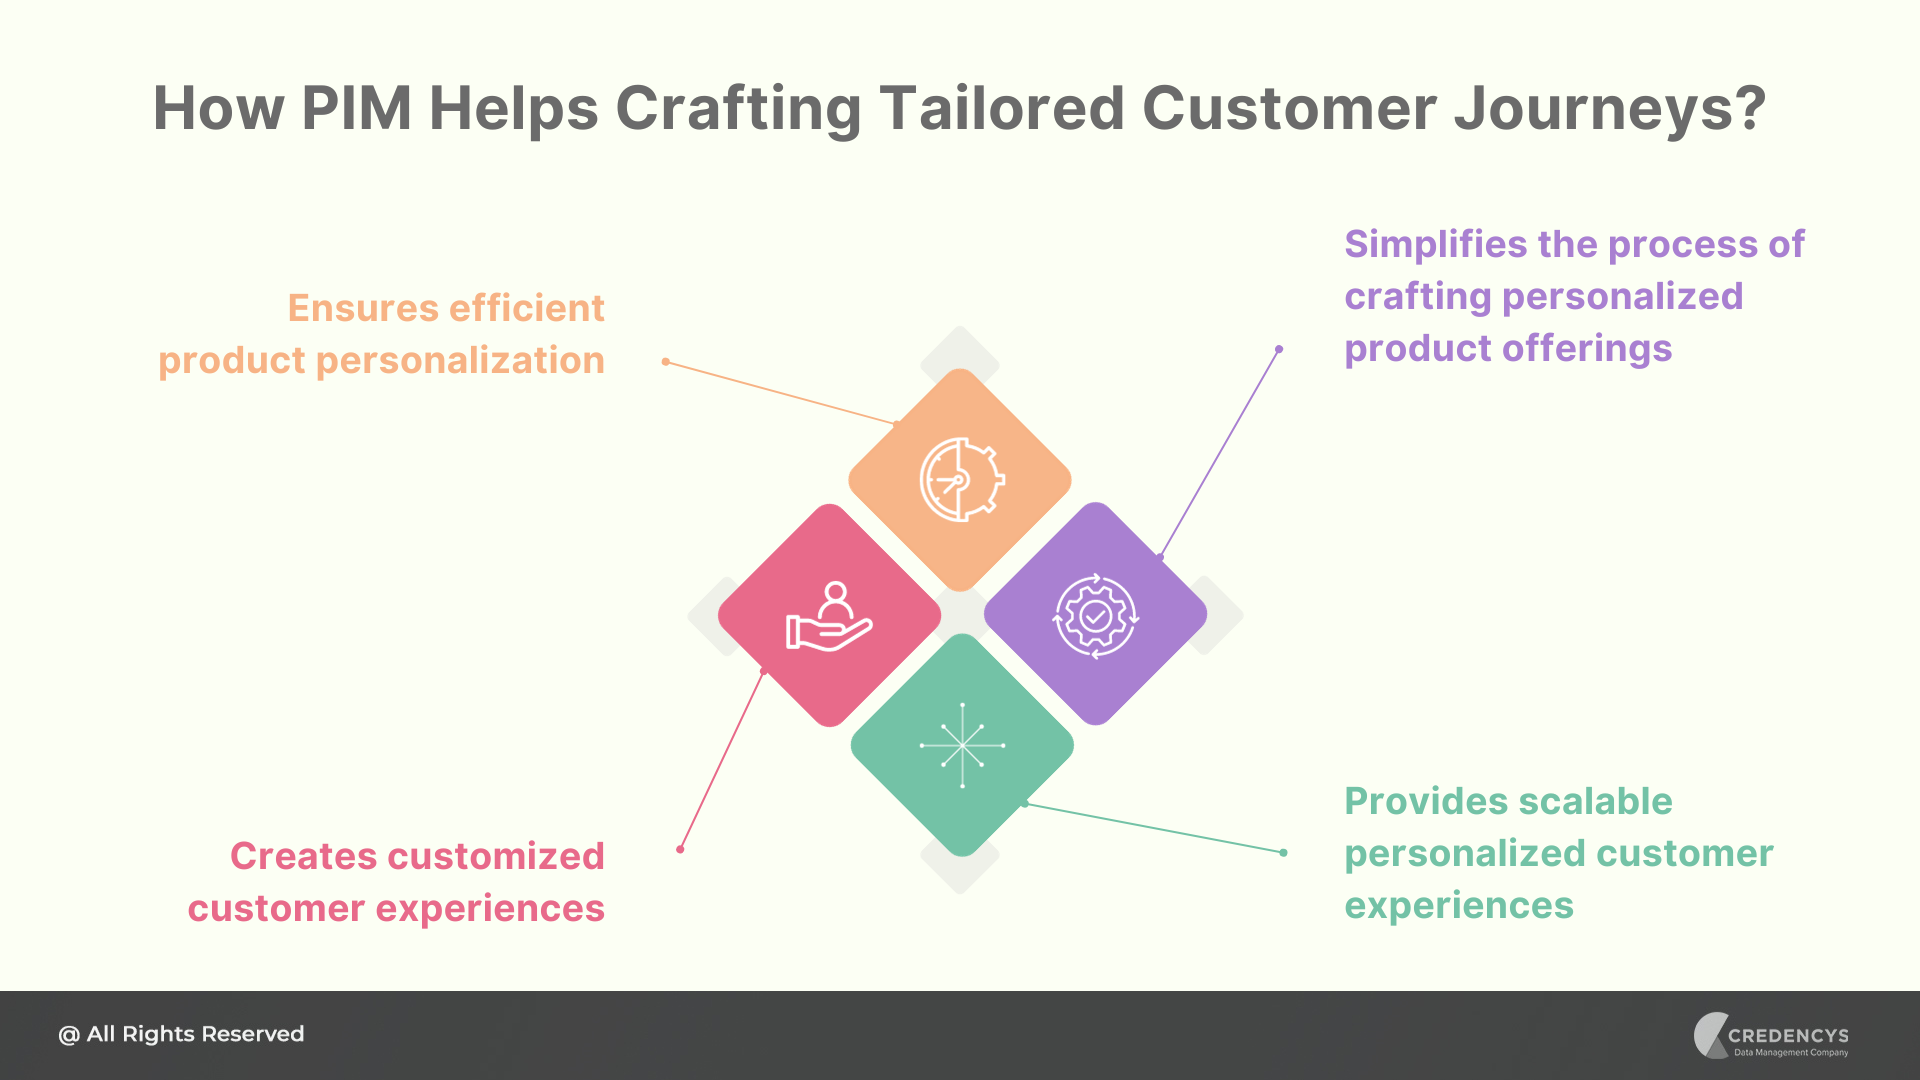 How PIM Helps Crafting Tailored Customer Journeys